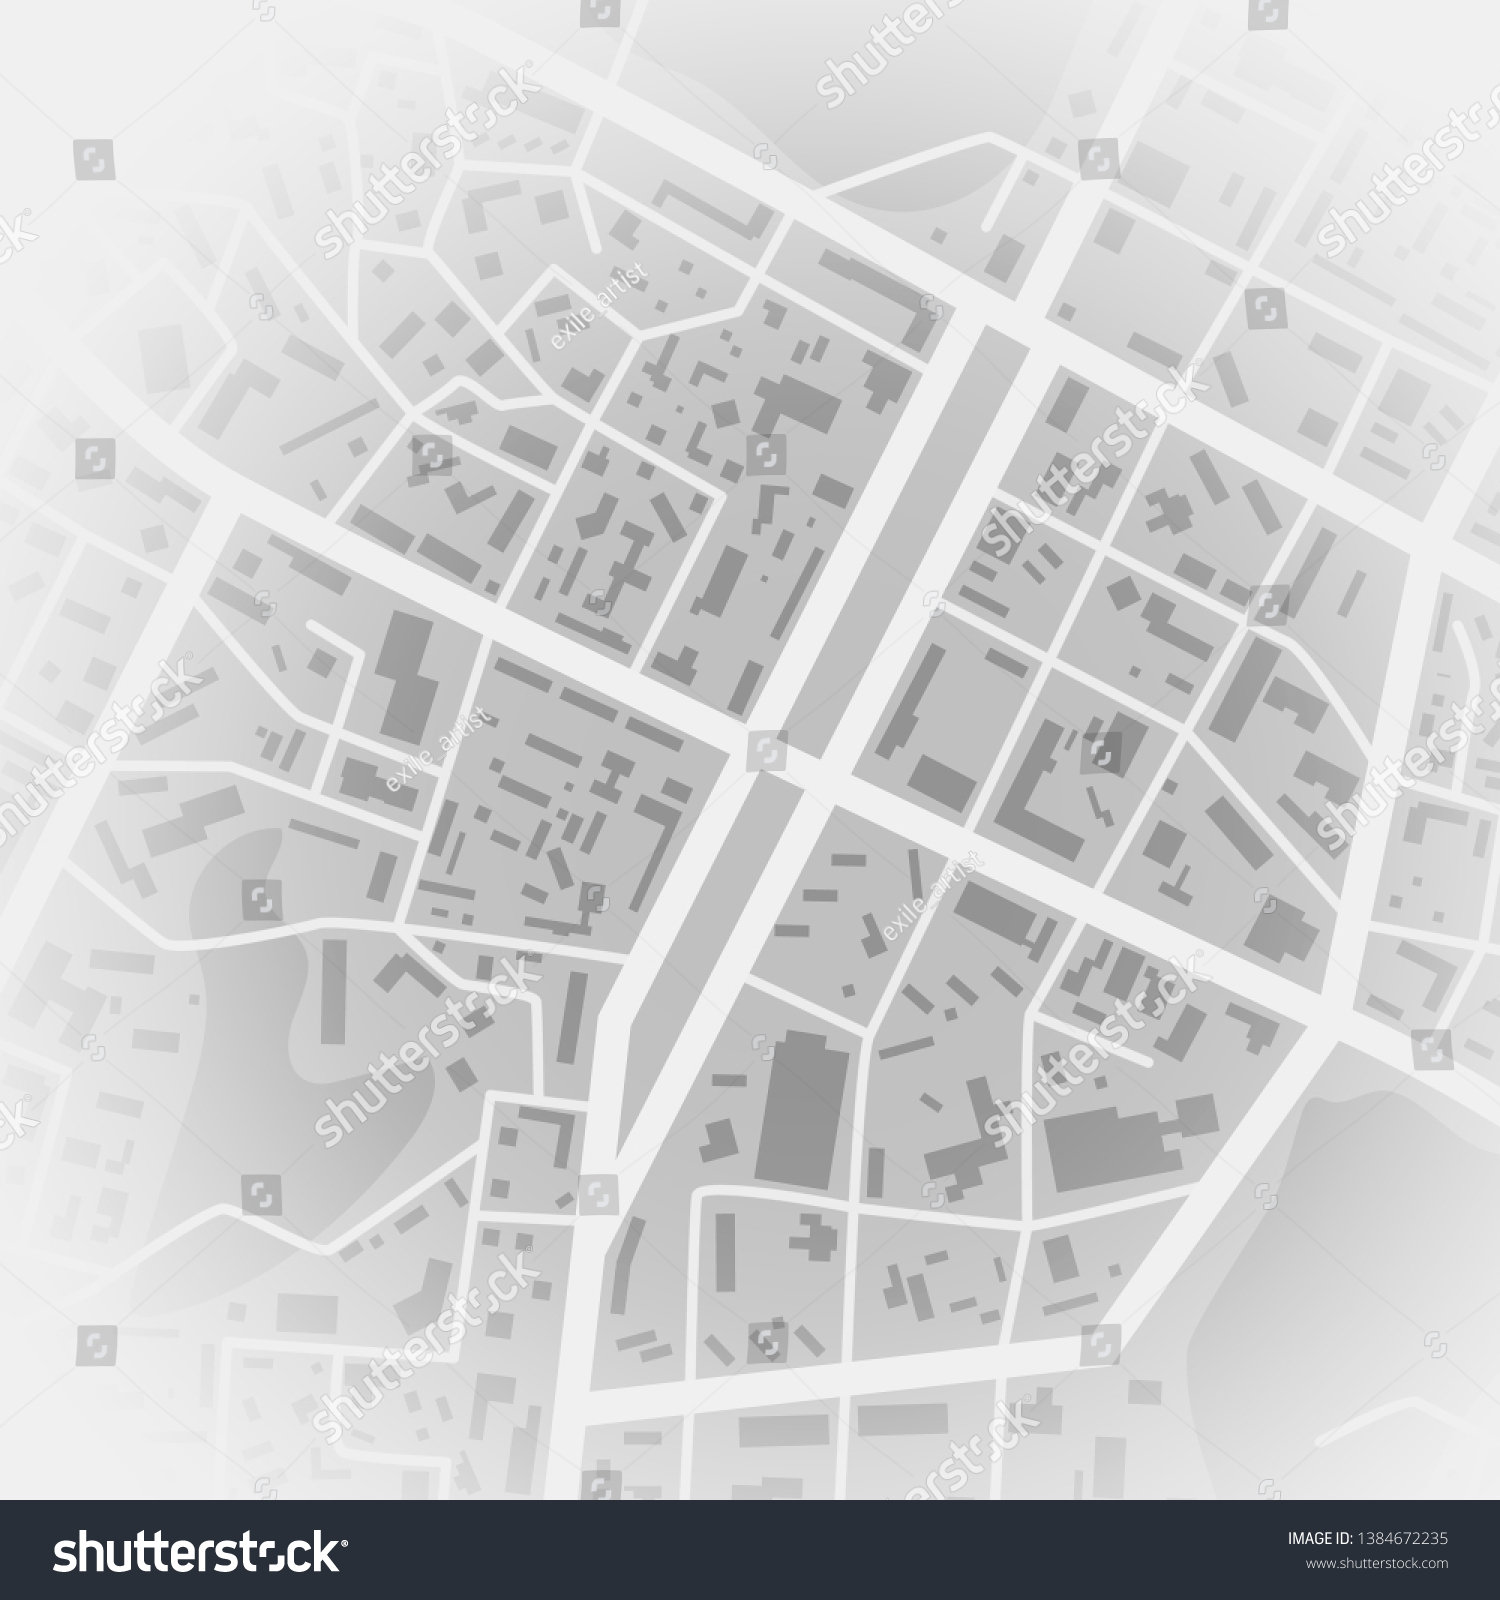 Abstract city map. Print with town topography. City residential district scheme. Vector illustration #1384672235